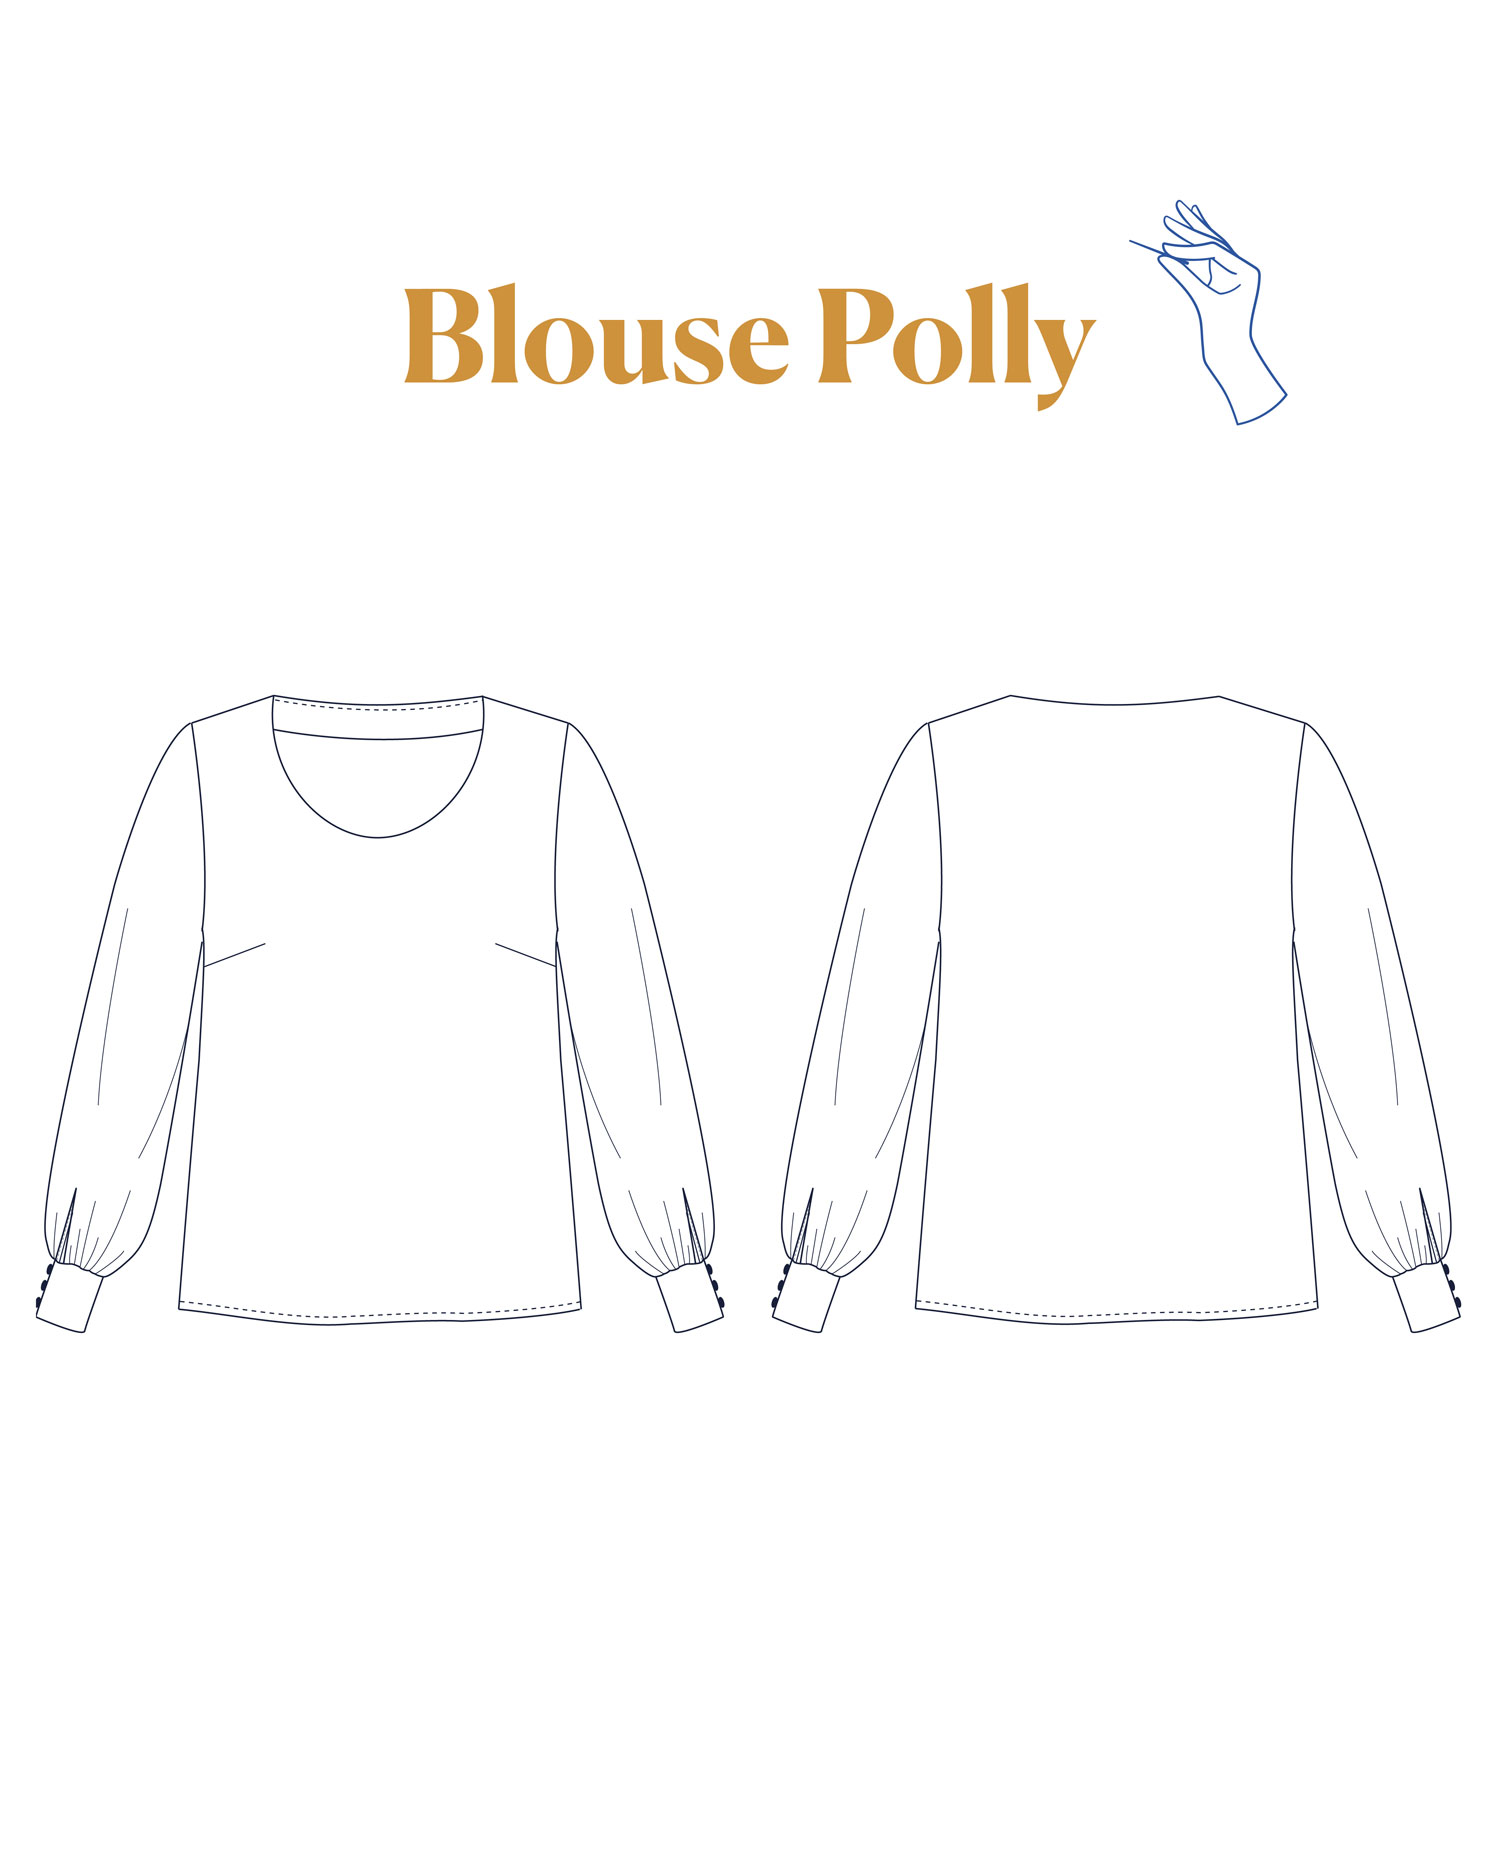 Blouse-Polly-couture-dessin